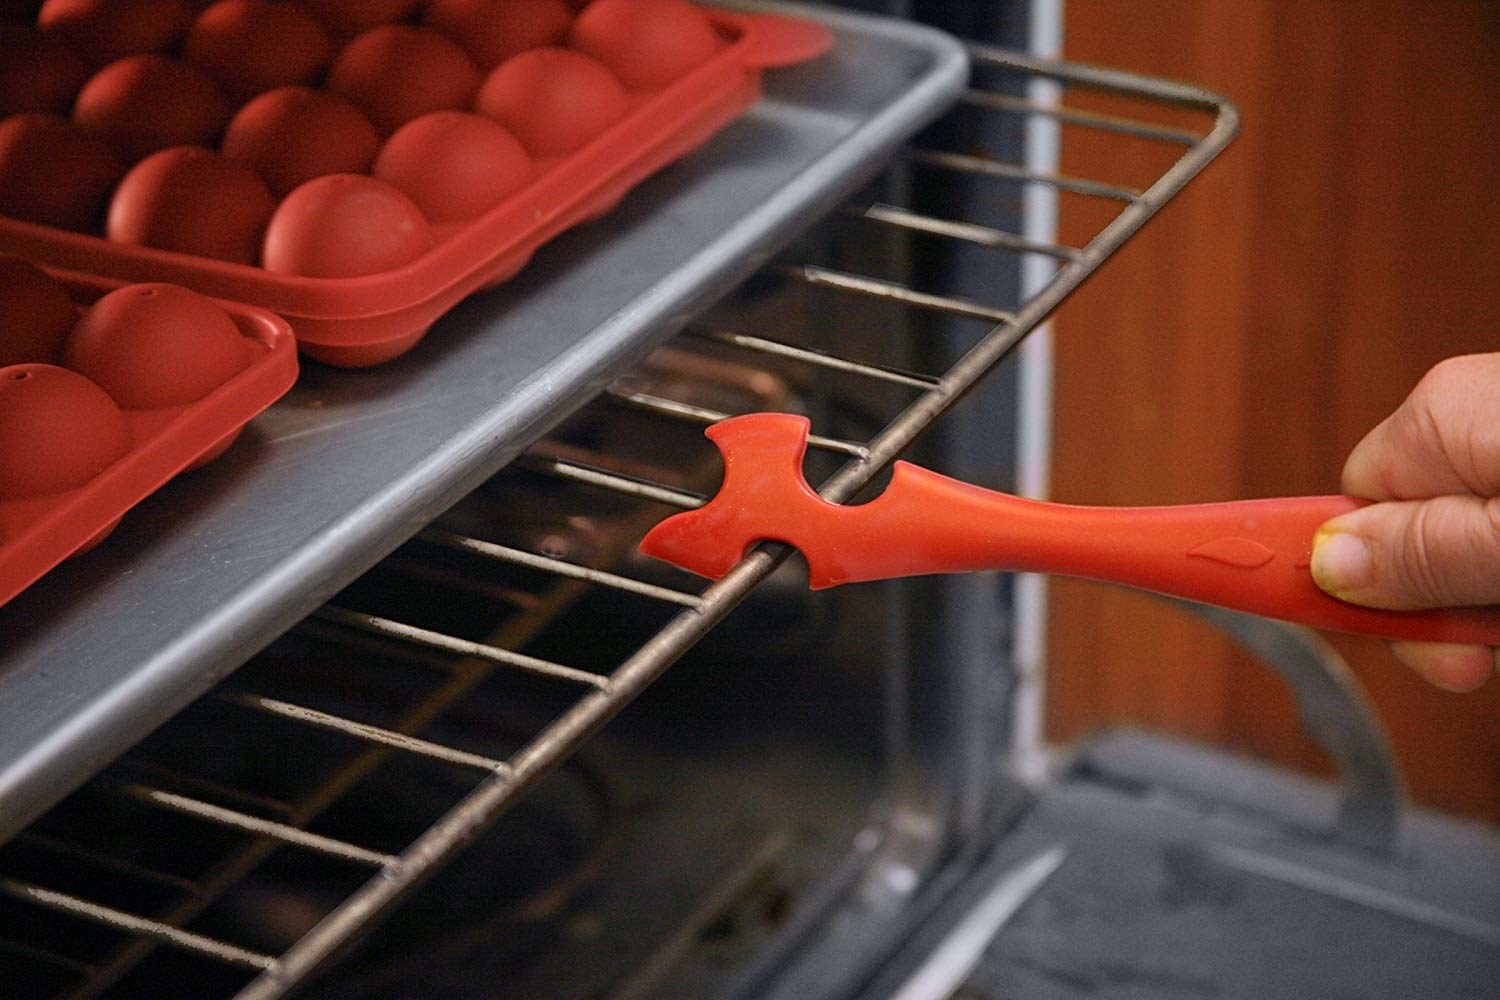 hook that pulls oven rack out 